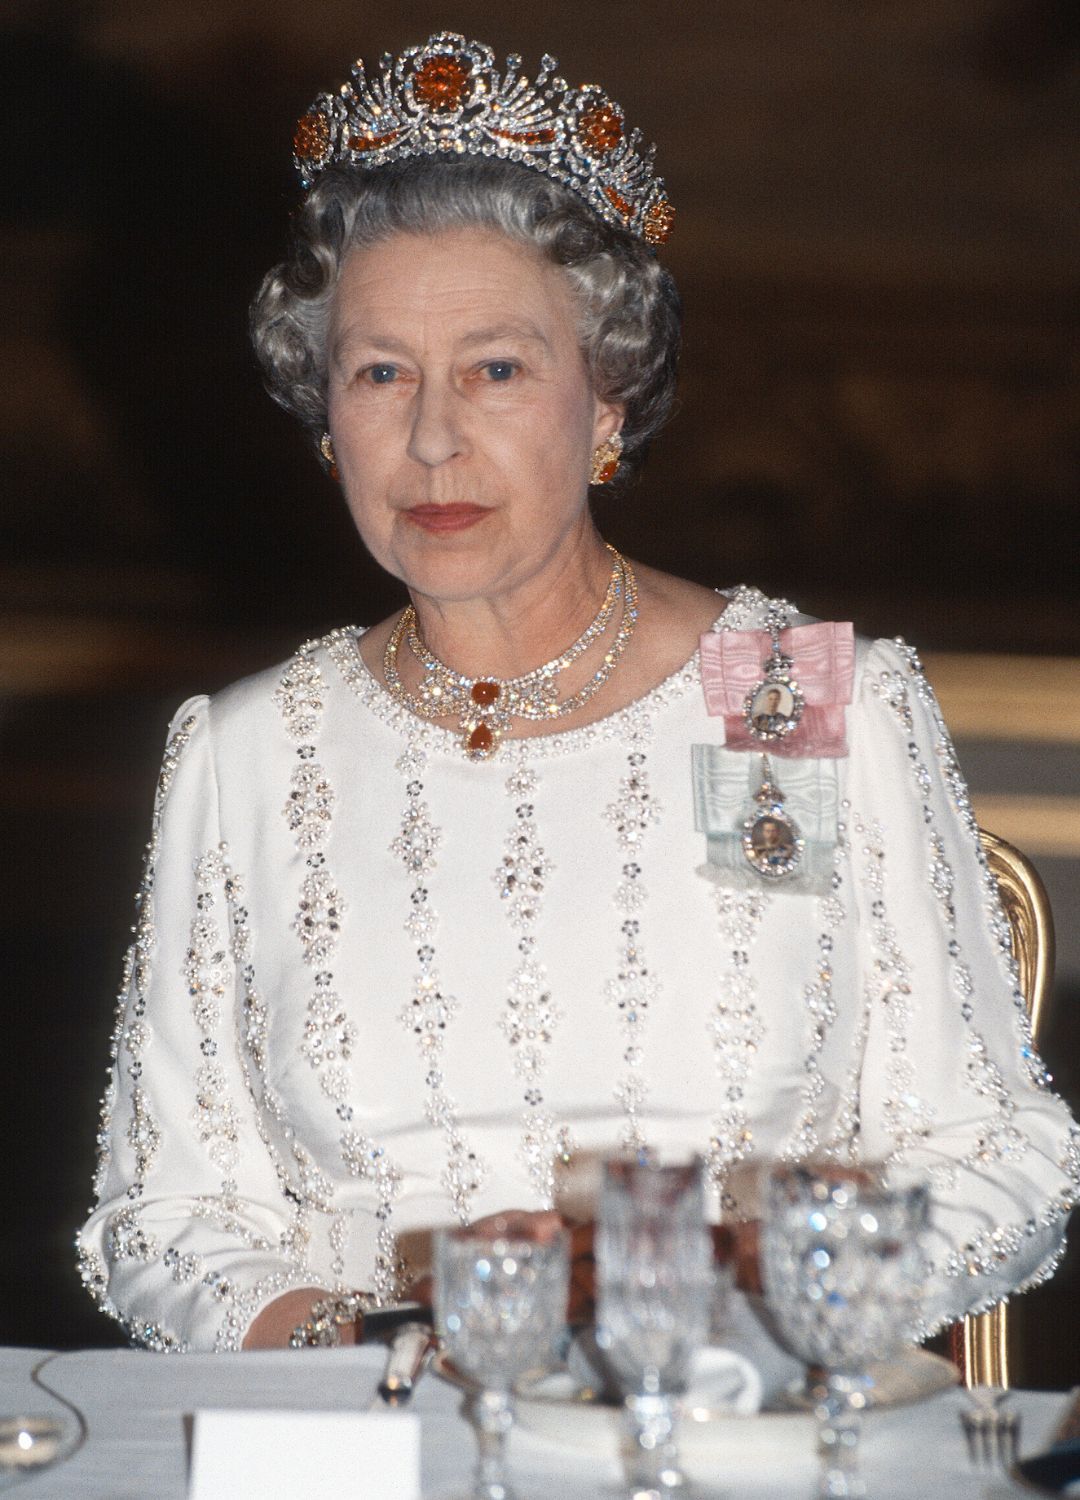 <p>                     The Burmese Ruby tiara was one of the late Queen's most decorative and colourful headpieces. Pictured here at a banquet during a state visit to Paris in 1992, Her Majesty wore the iconic tiara, designed to resemble a wreath of roses with silver, diamonds, gold and rubies. There is a touching reason the Queen had this Burmese Ruby tiara made and why specifically it holds 96 rubies in total.                   </p>